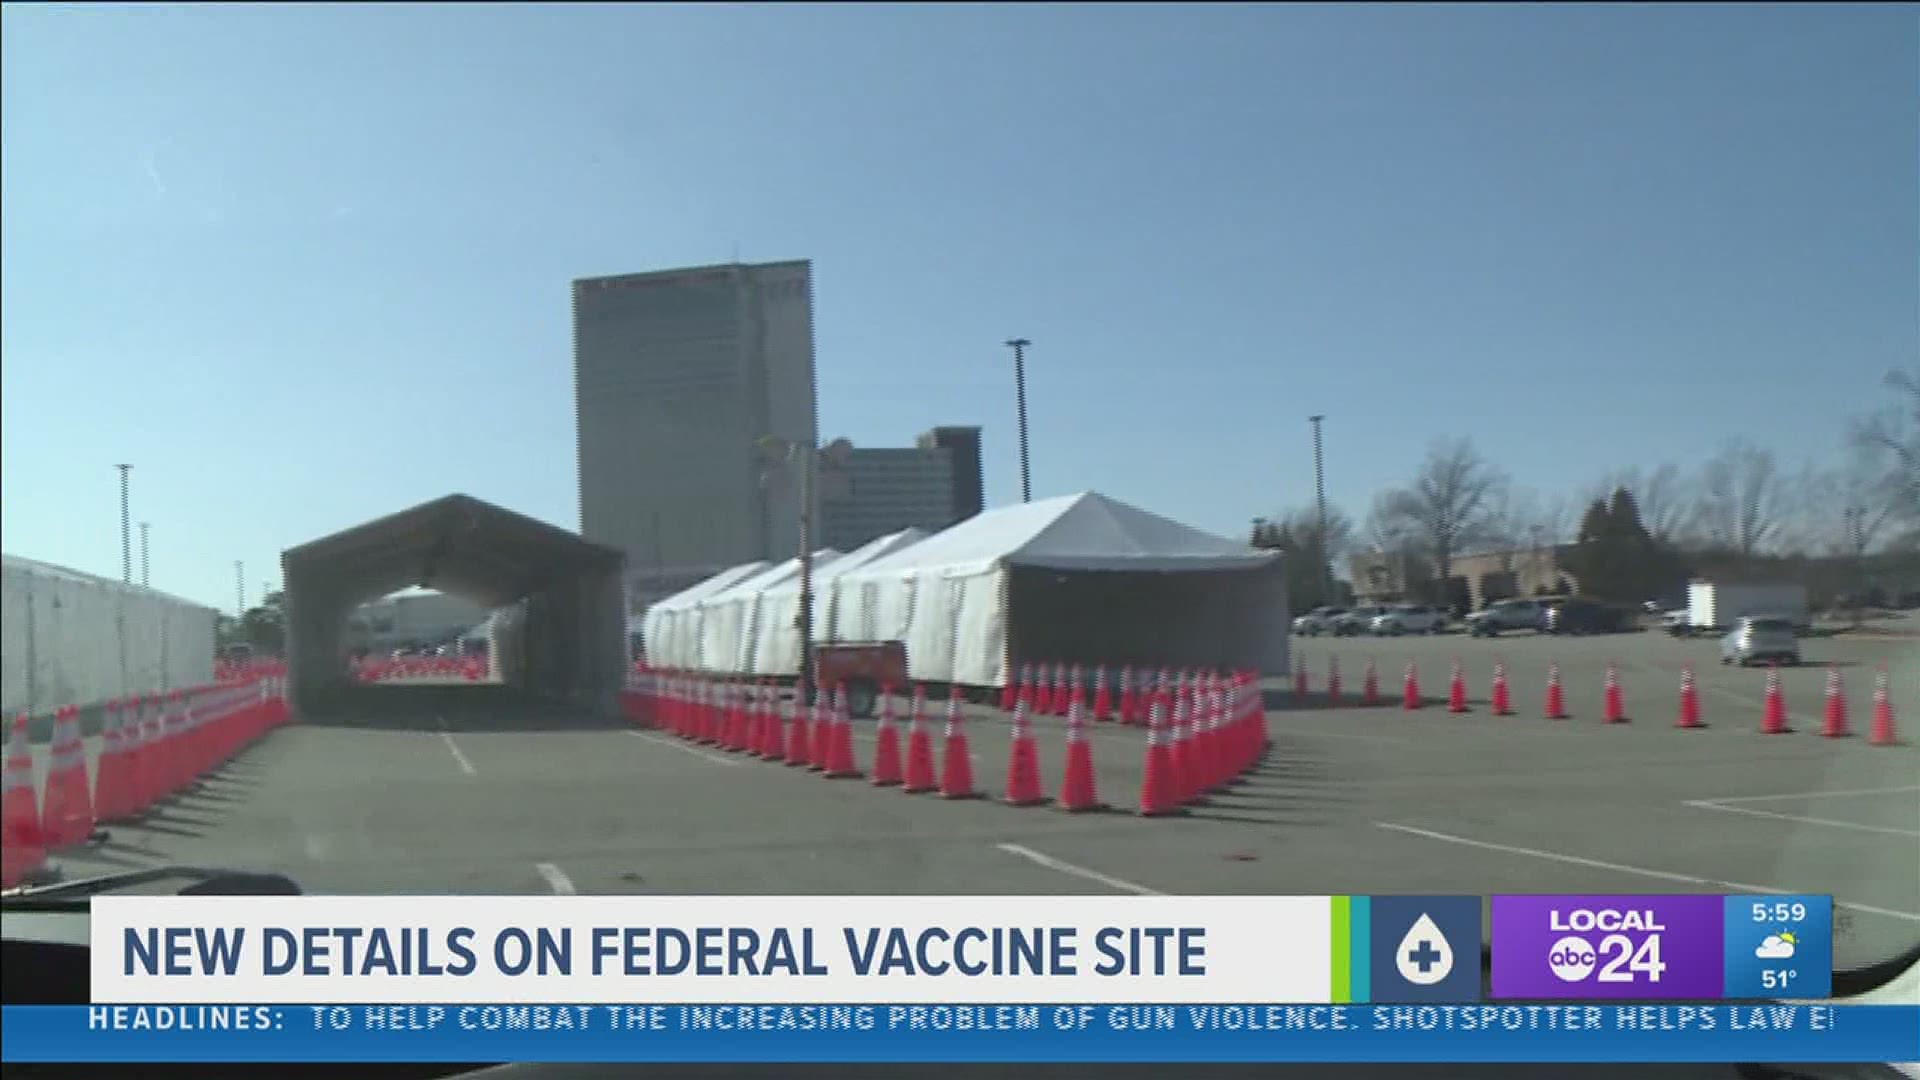 FEMA's community vaccination center next to Liberty Bowl Memorial Stadium will be able to vaccinate 21,000 a week, which frees up staff to provide doses elsewhere.